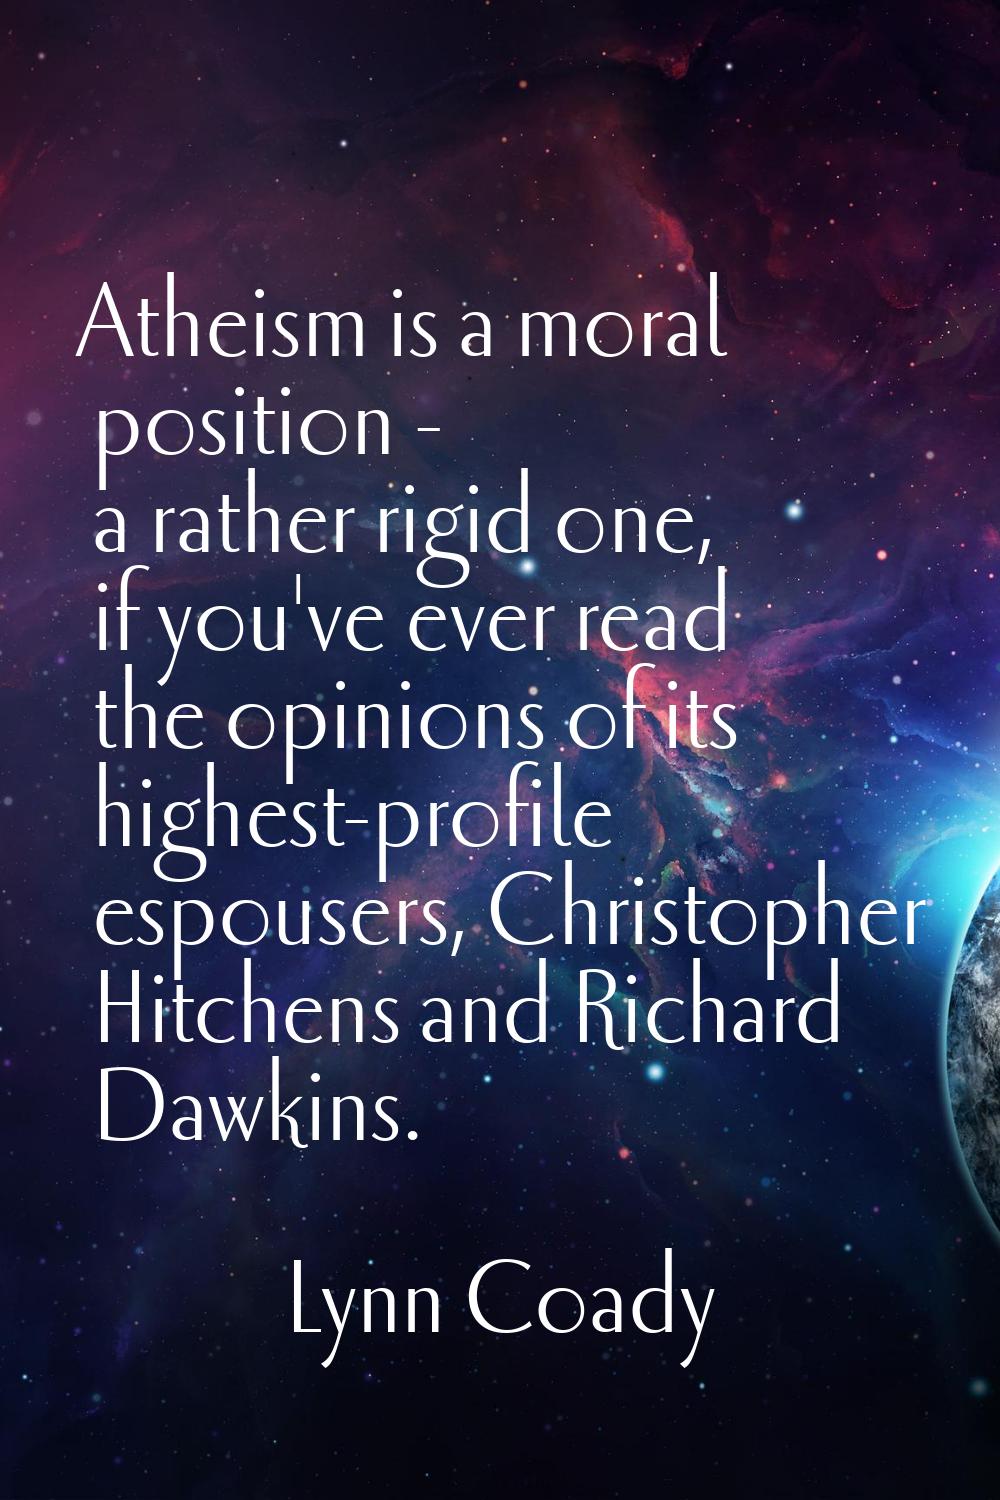 Atheism is a moral position - a rather rigid one, if you've ever read the opinions of its highest-p